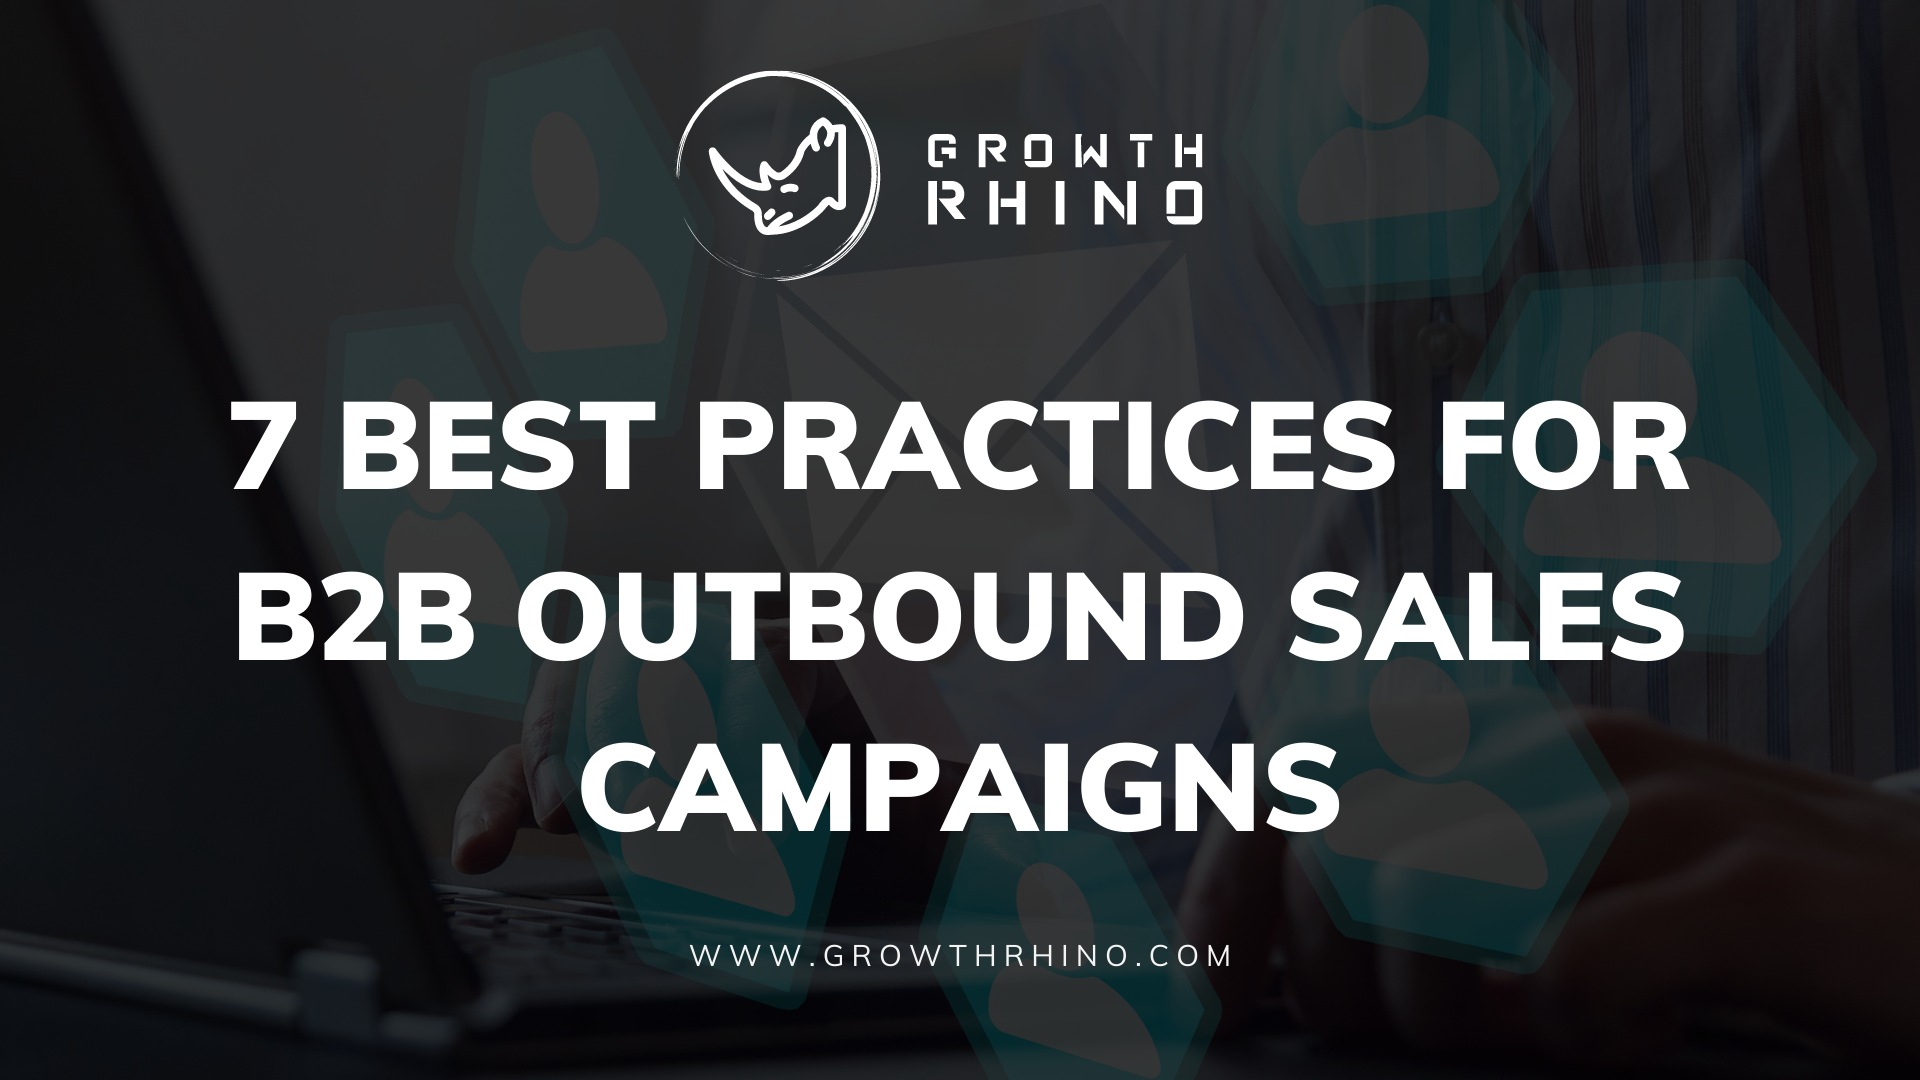 7‌ ‌Best‌ ‌Practices‌ ‌for‌ ‌B2B‌ ‌Outbound‌ ‌Sales‌ ‌Campaigns‌